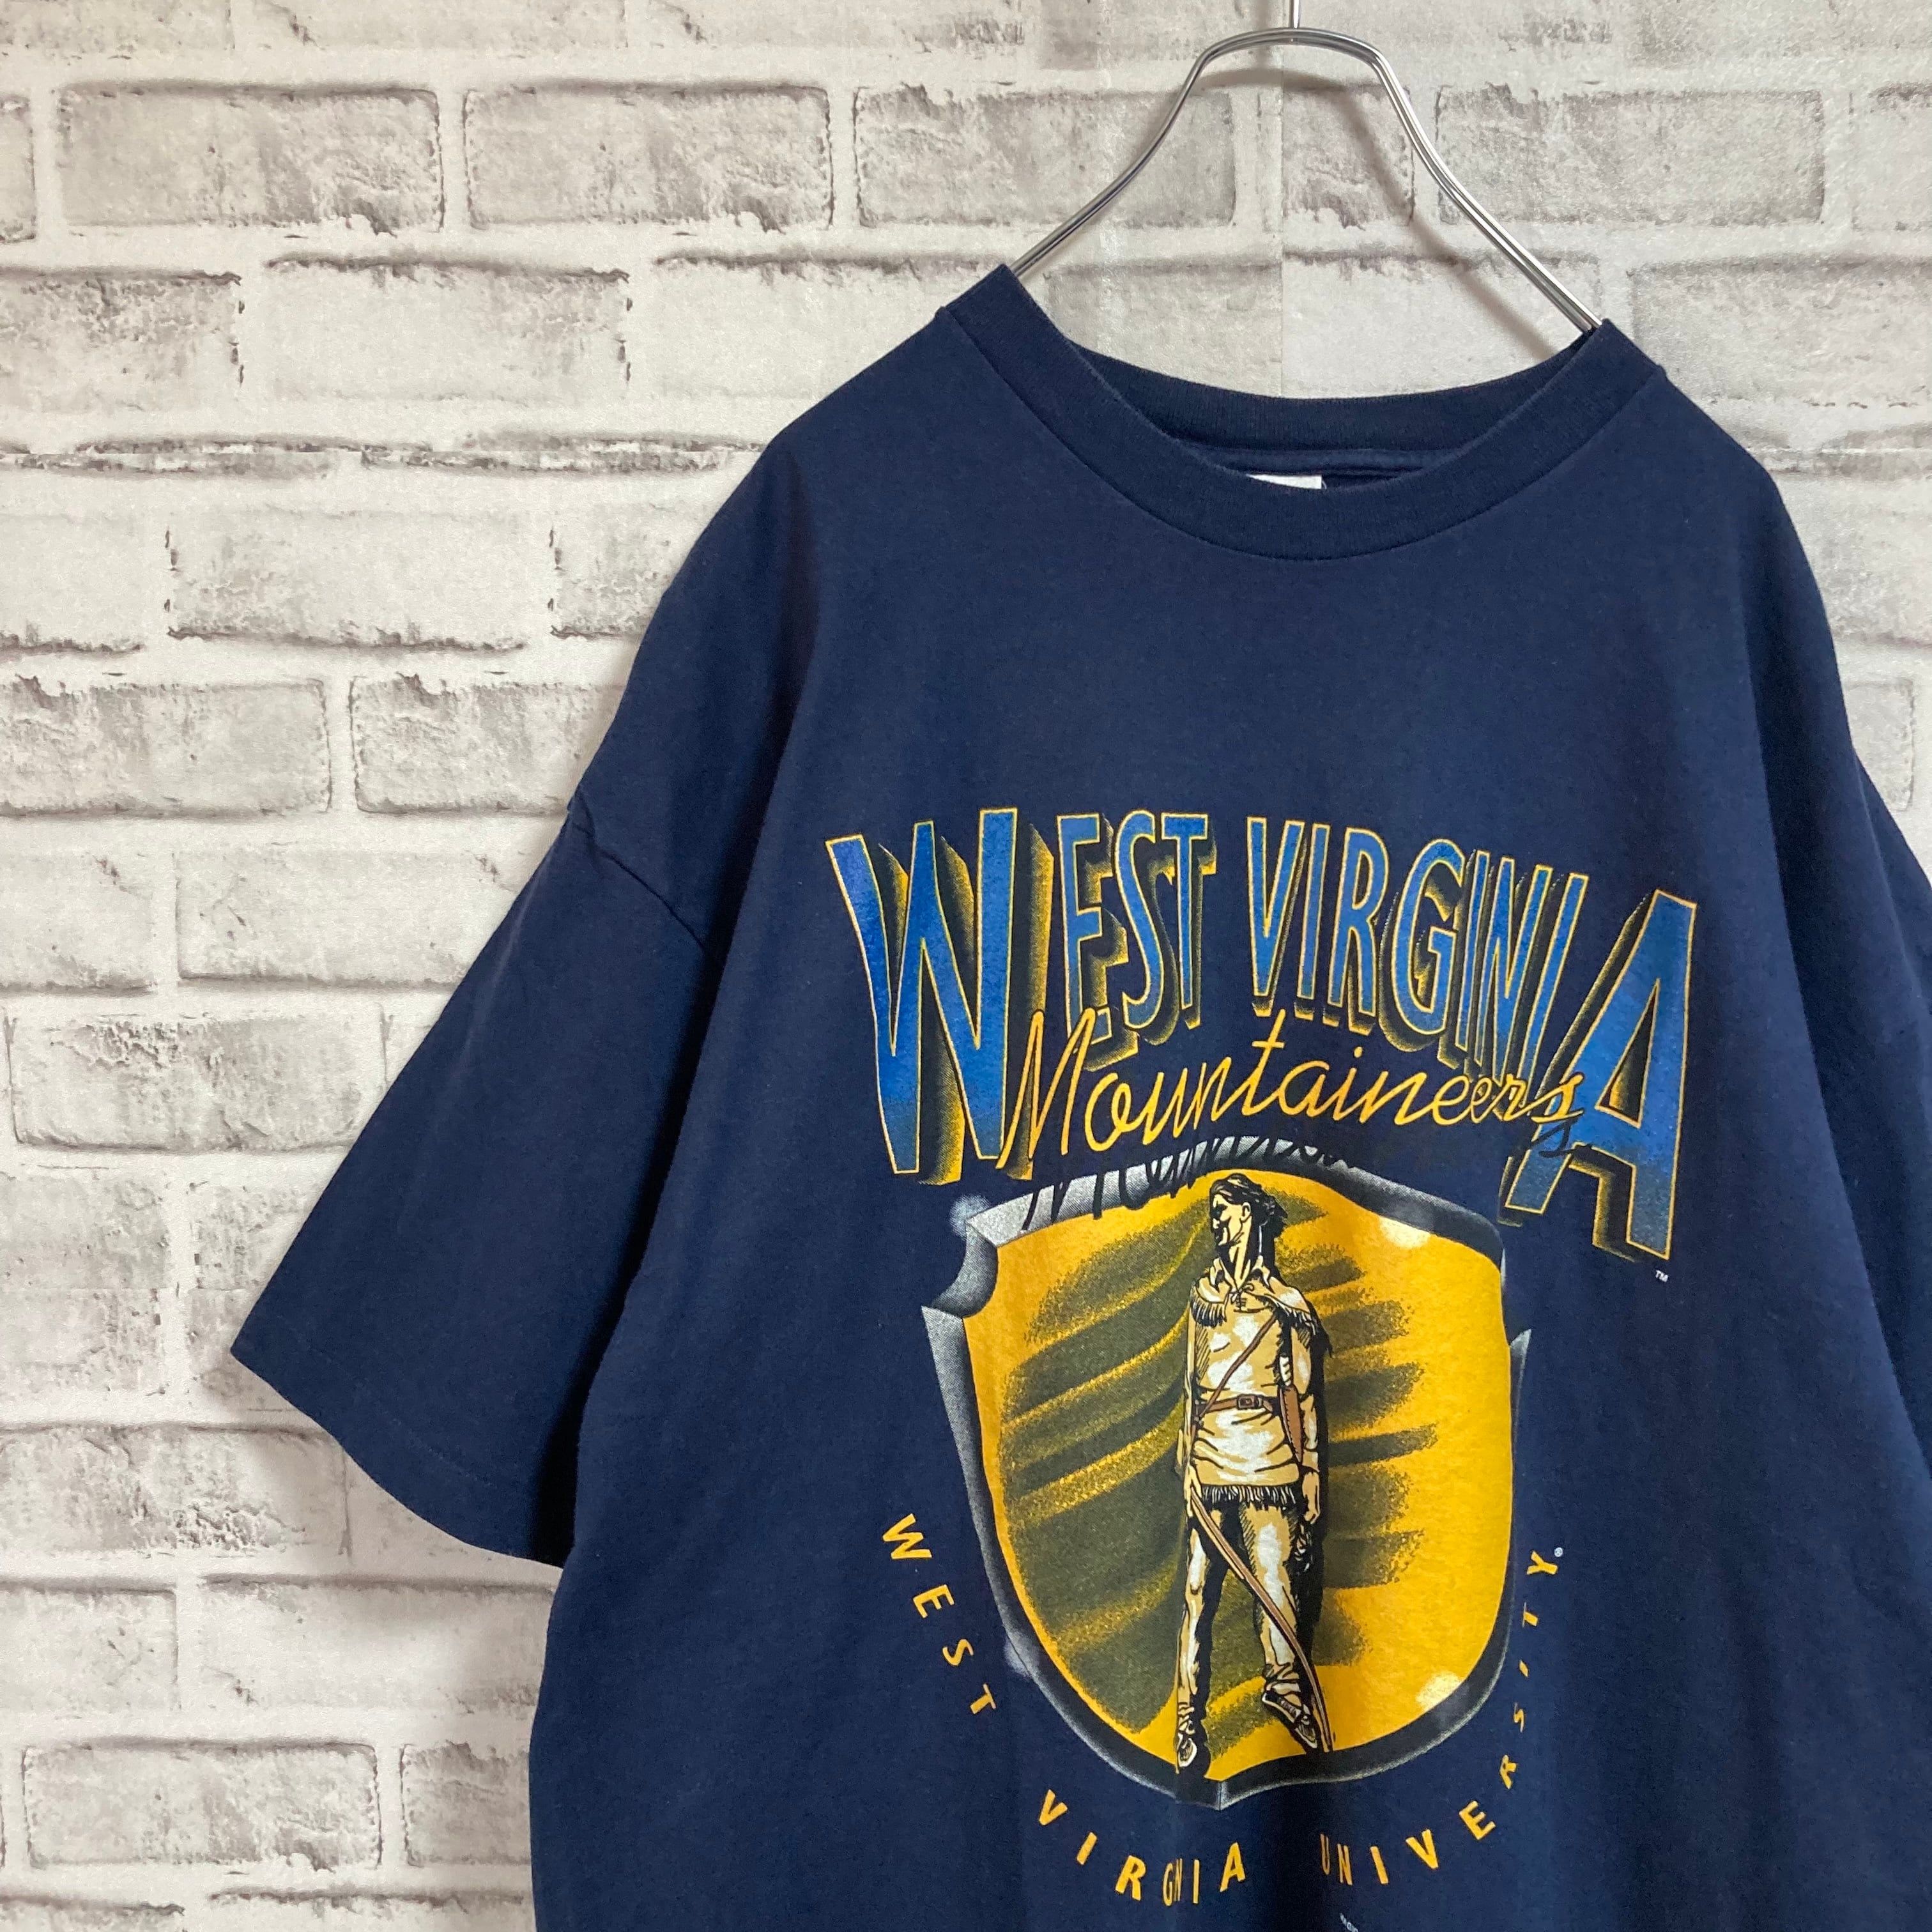 Riddell】S/S Tee XL “WEST VIRGINIA UNIVERSITY” Made in USA Tシャツ ...